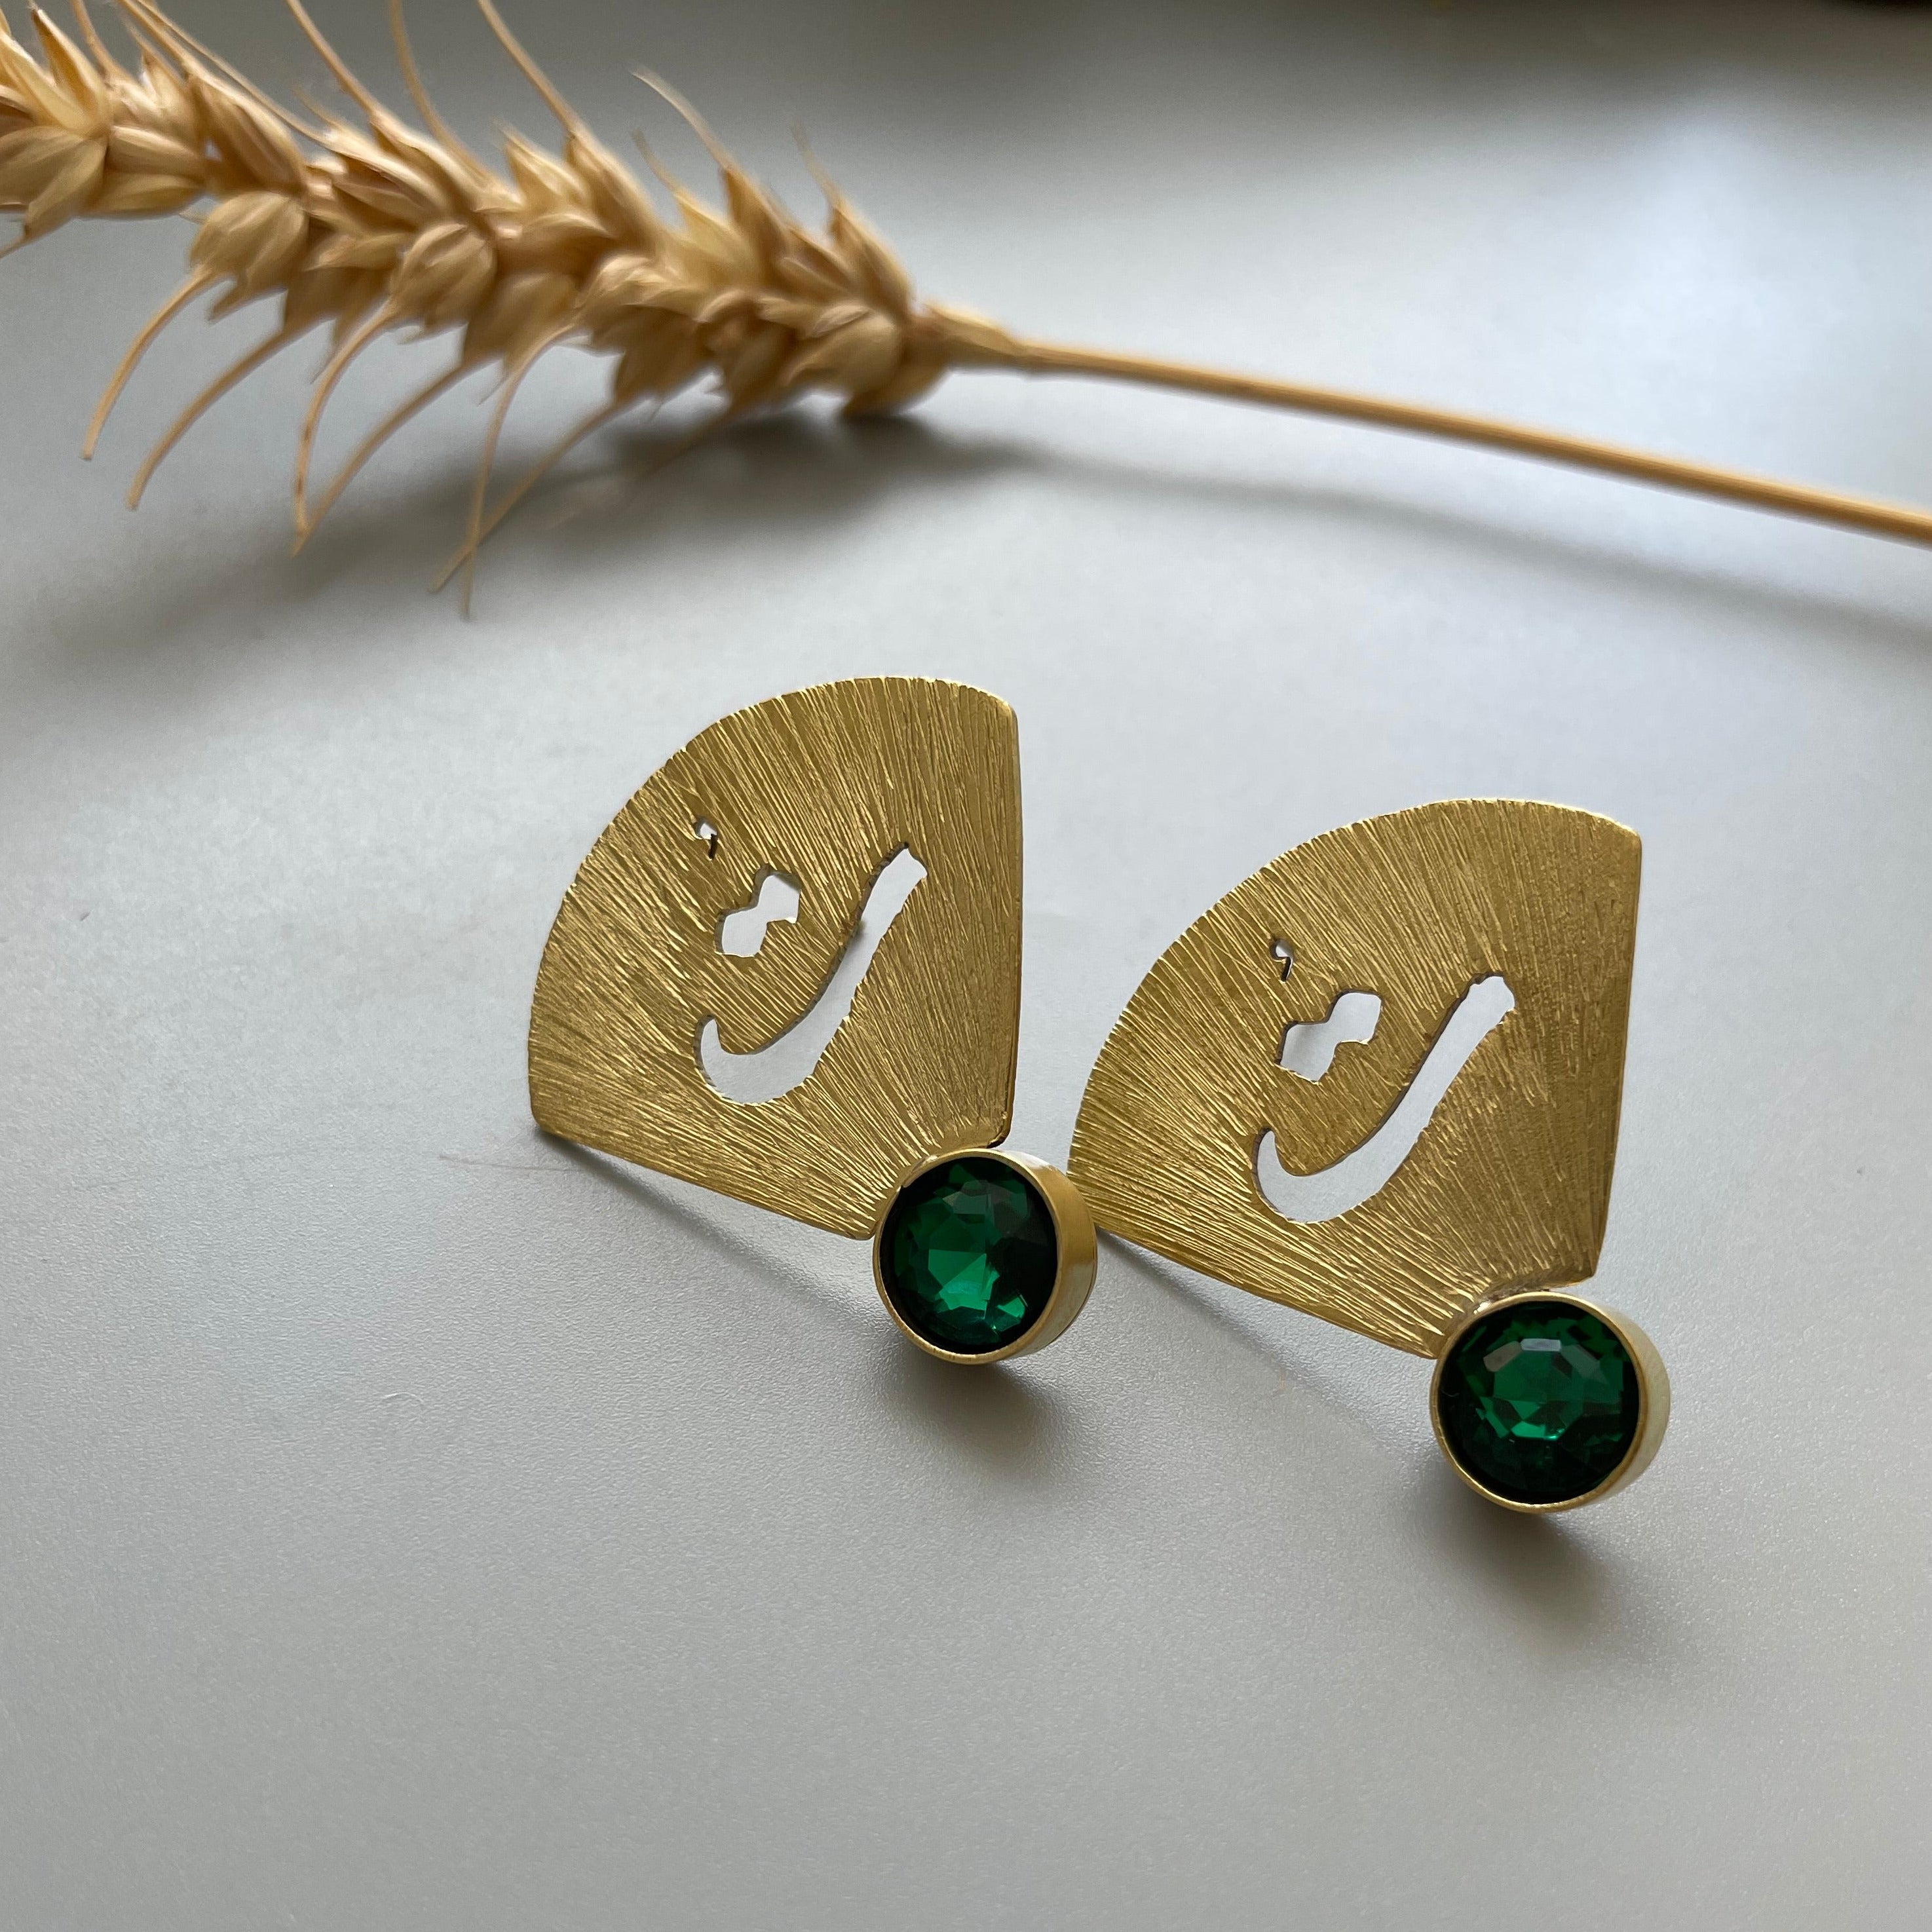 Handmade Brass Earrings with Persian Calligraphy and Shiny Green Crystal